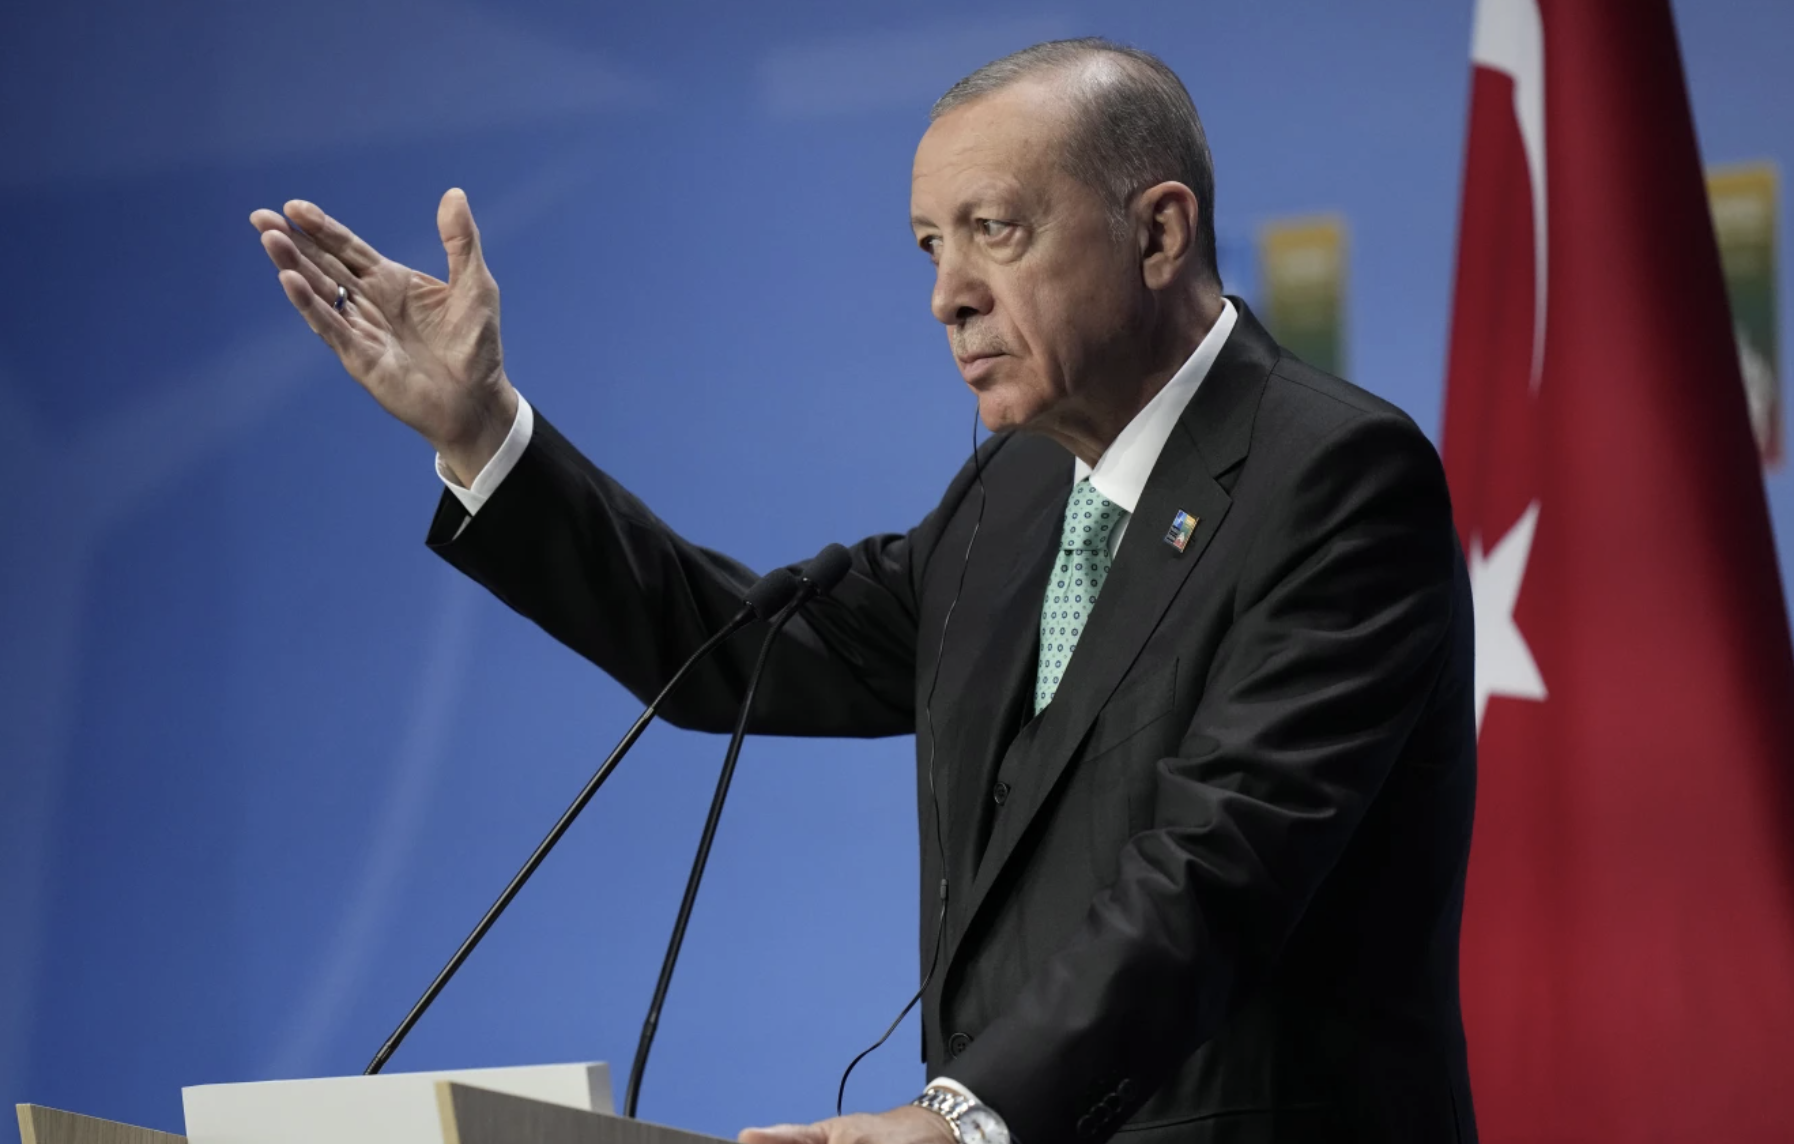 Turkey receives important concessions at NATO summit